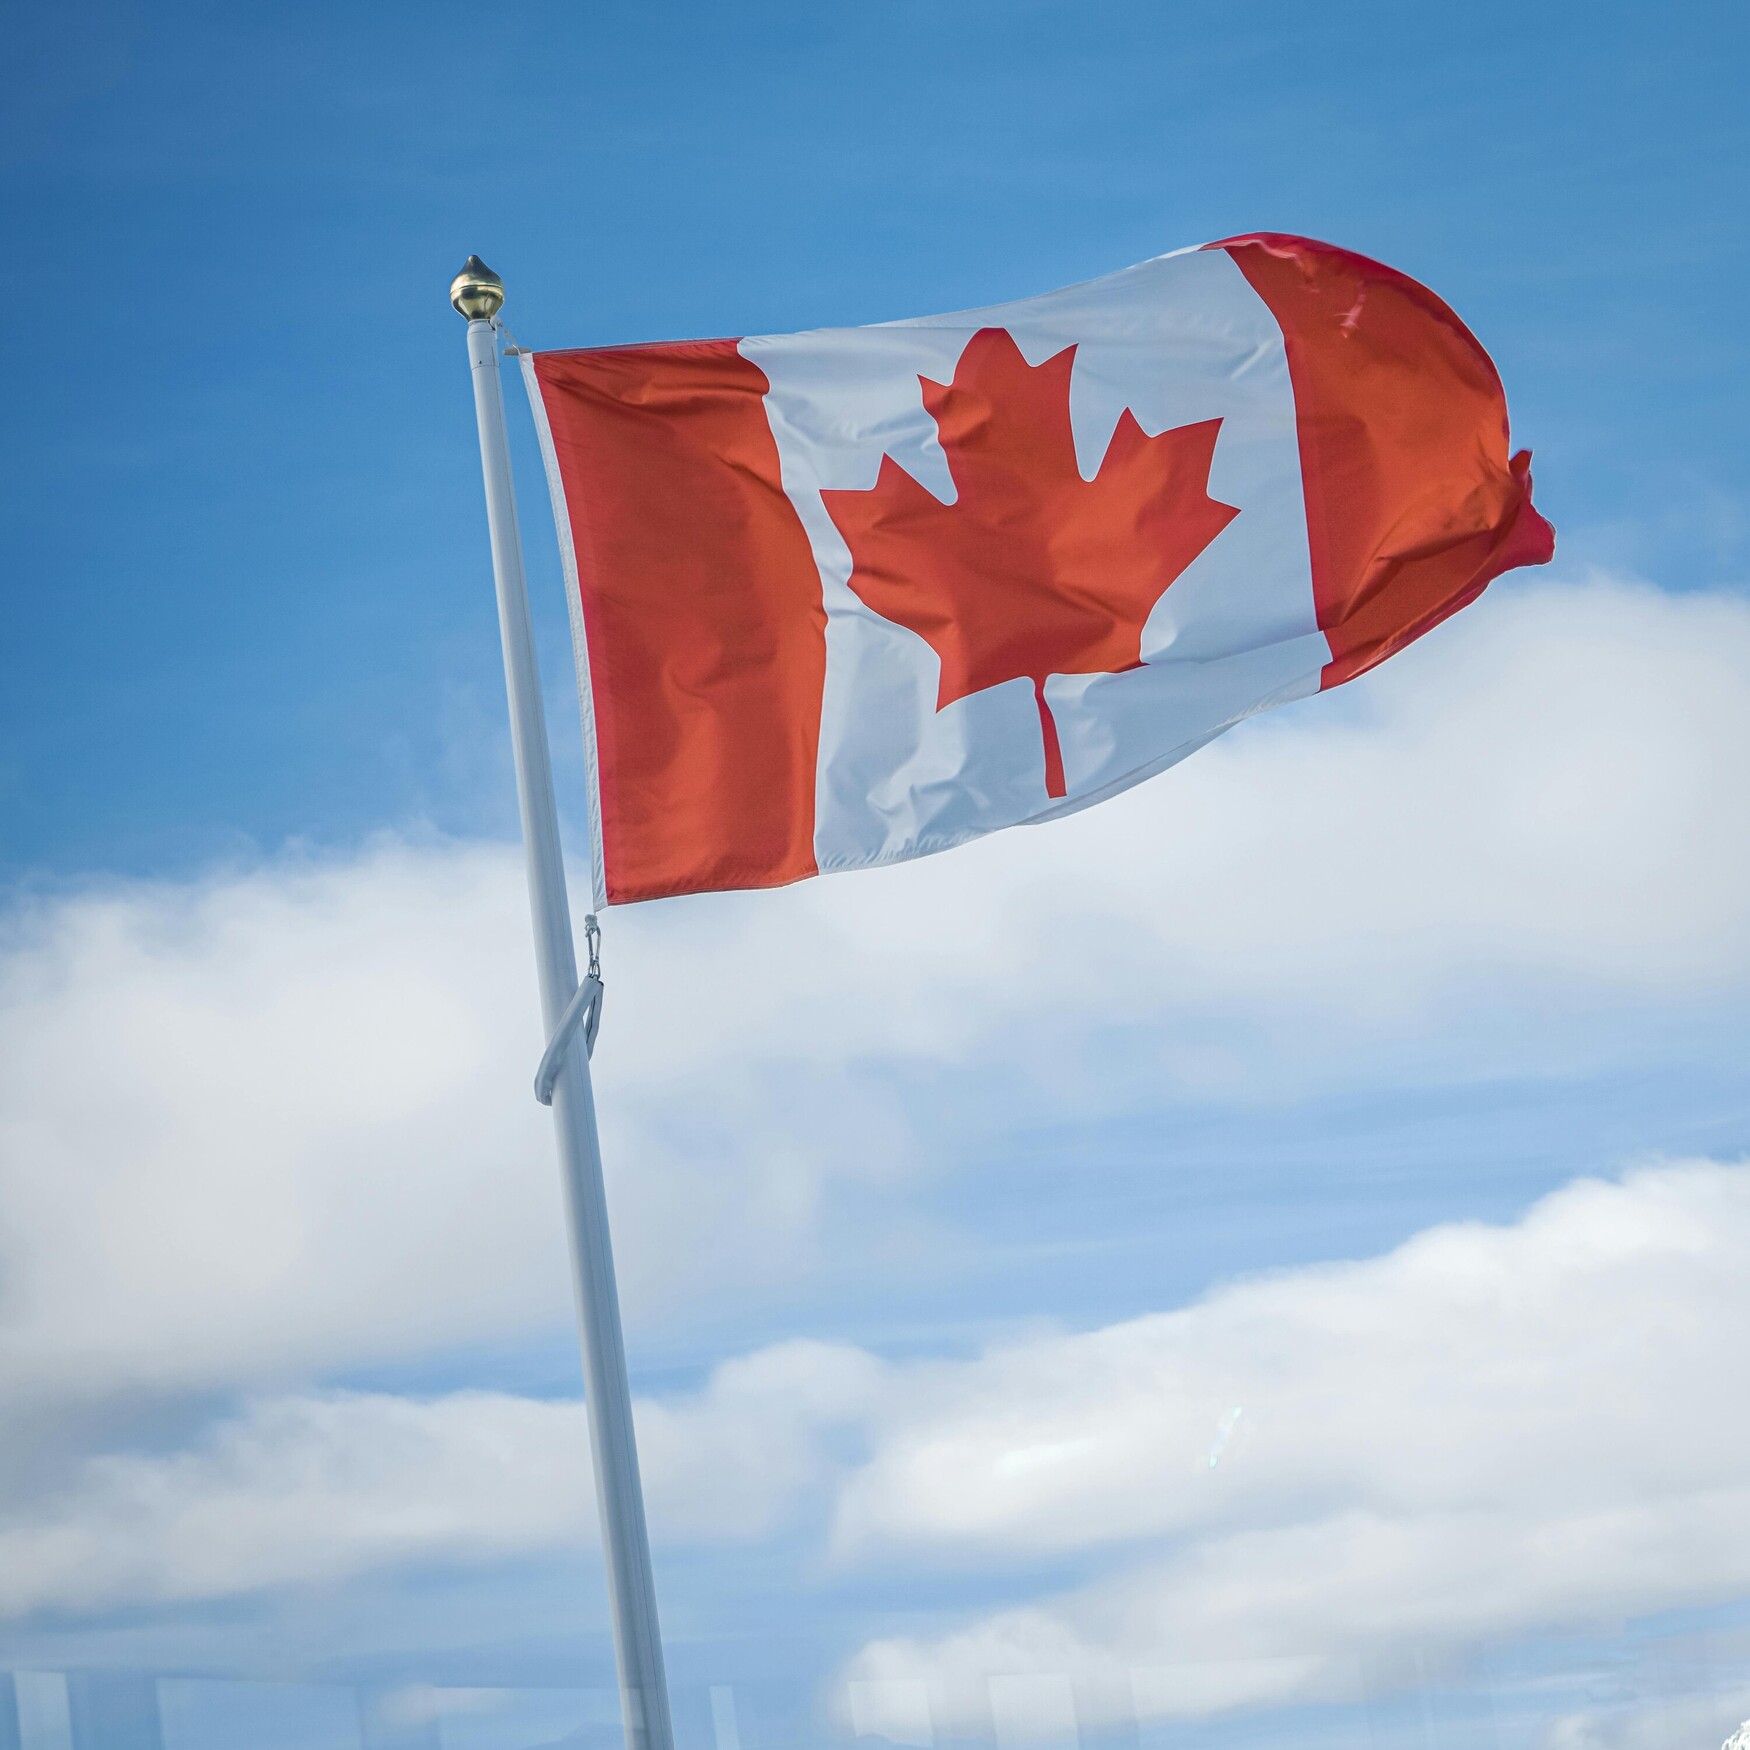 The Canadian flag flies at full mast